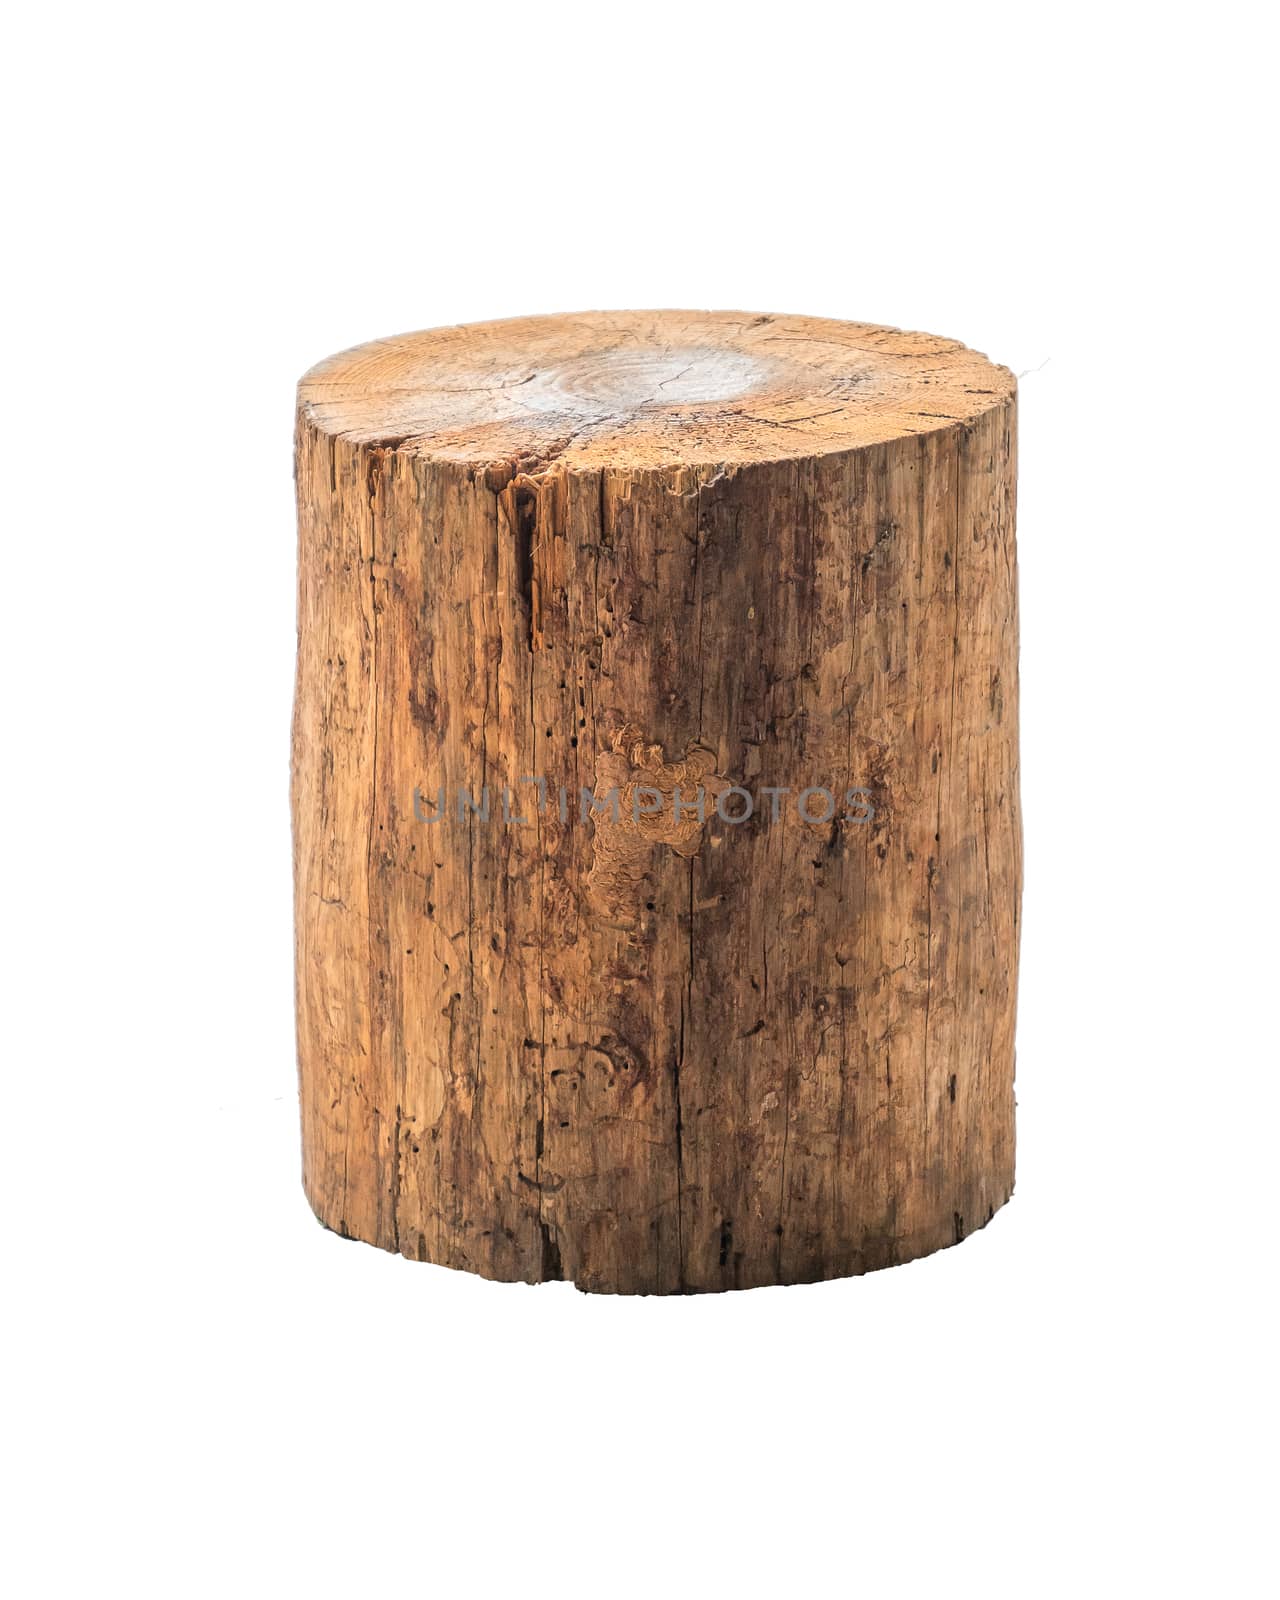 Isolated grunge log stool or chair craft artisan handmade furniture on white background.